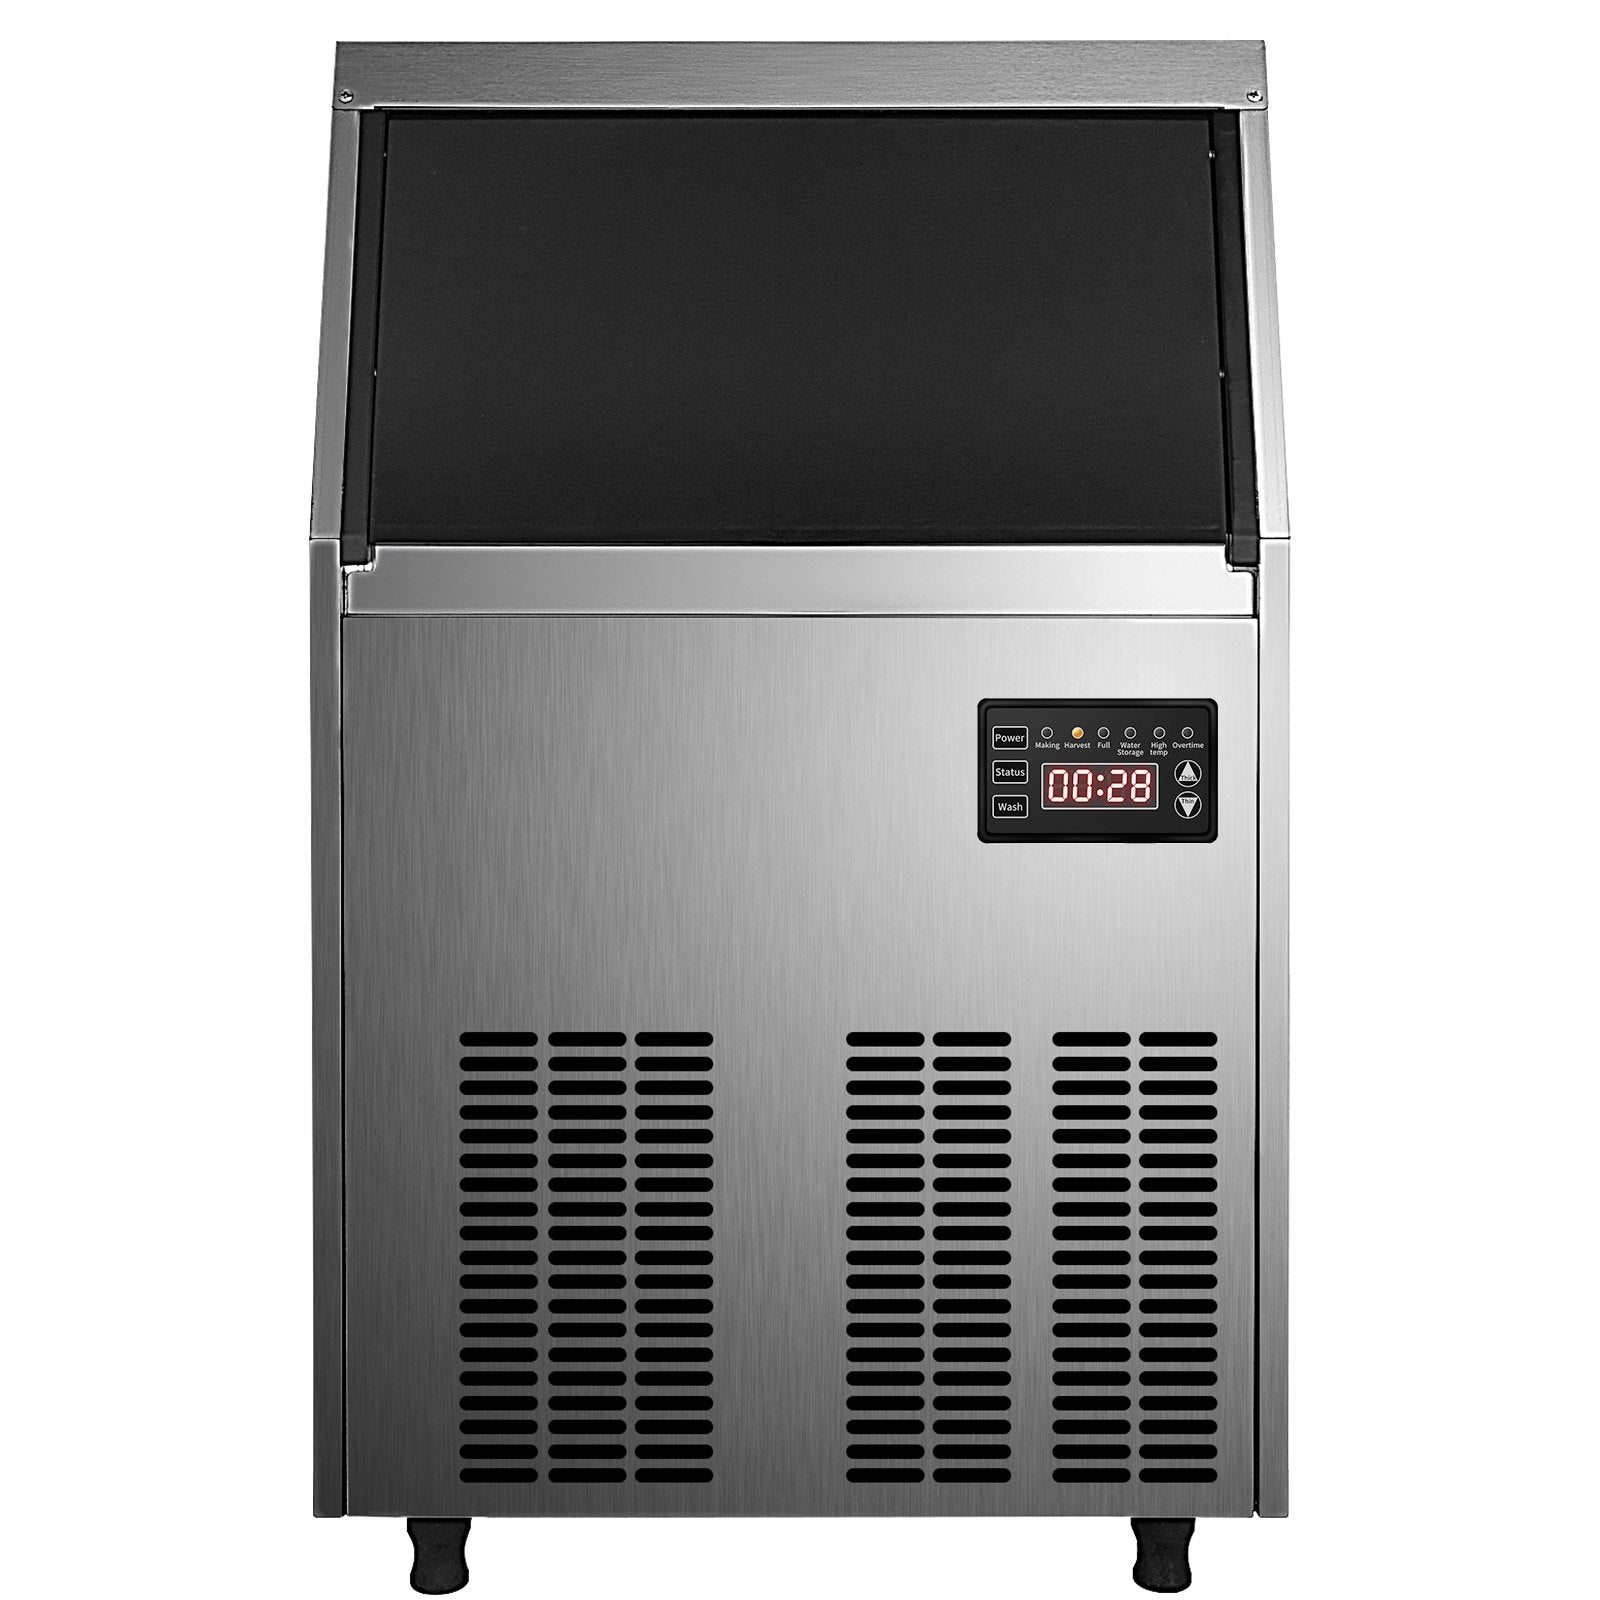 VEVOR 110V Commercial Ice Maker 110LBS/24H with 44lbs Storage Capacity Stainless Steel Commercial Ice Machine 40 Ice Cubes Per Plate Industrial Ice Maker Machine Auto Clean for Bar Home Supermarkets-9